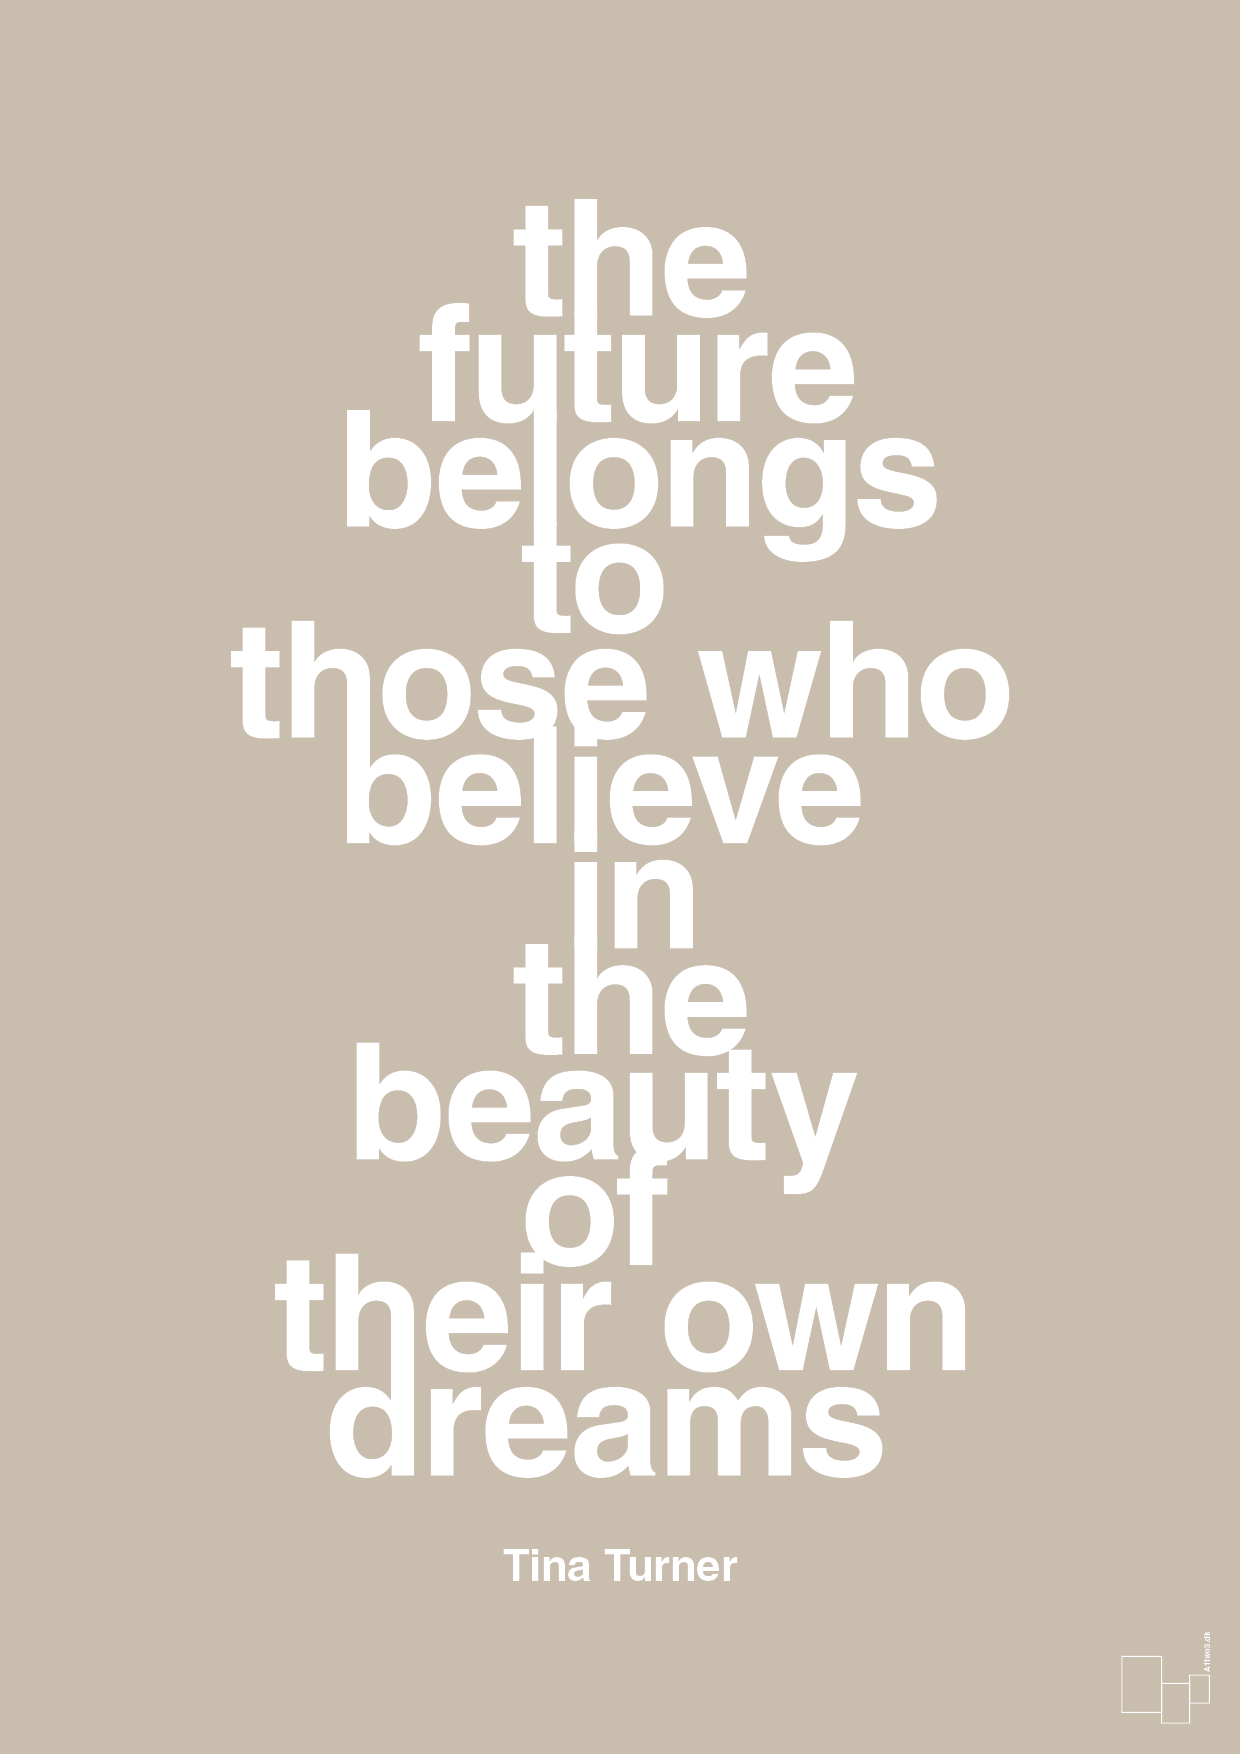 the future belongs to those who believe in the beauty of their own dreams - Plakat med Citater i Creamy Mushroom